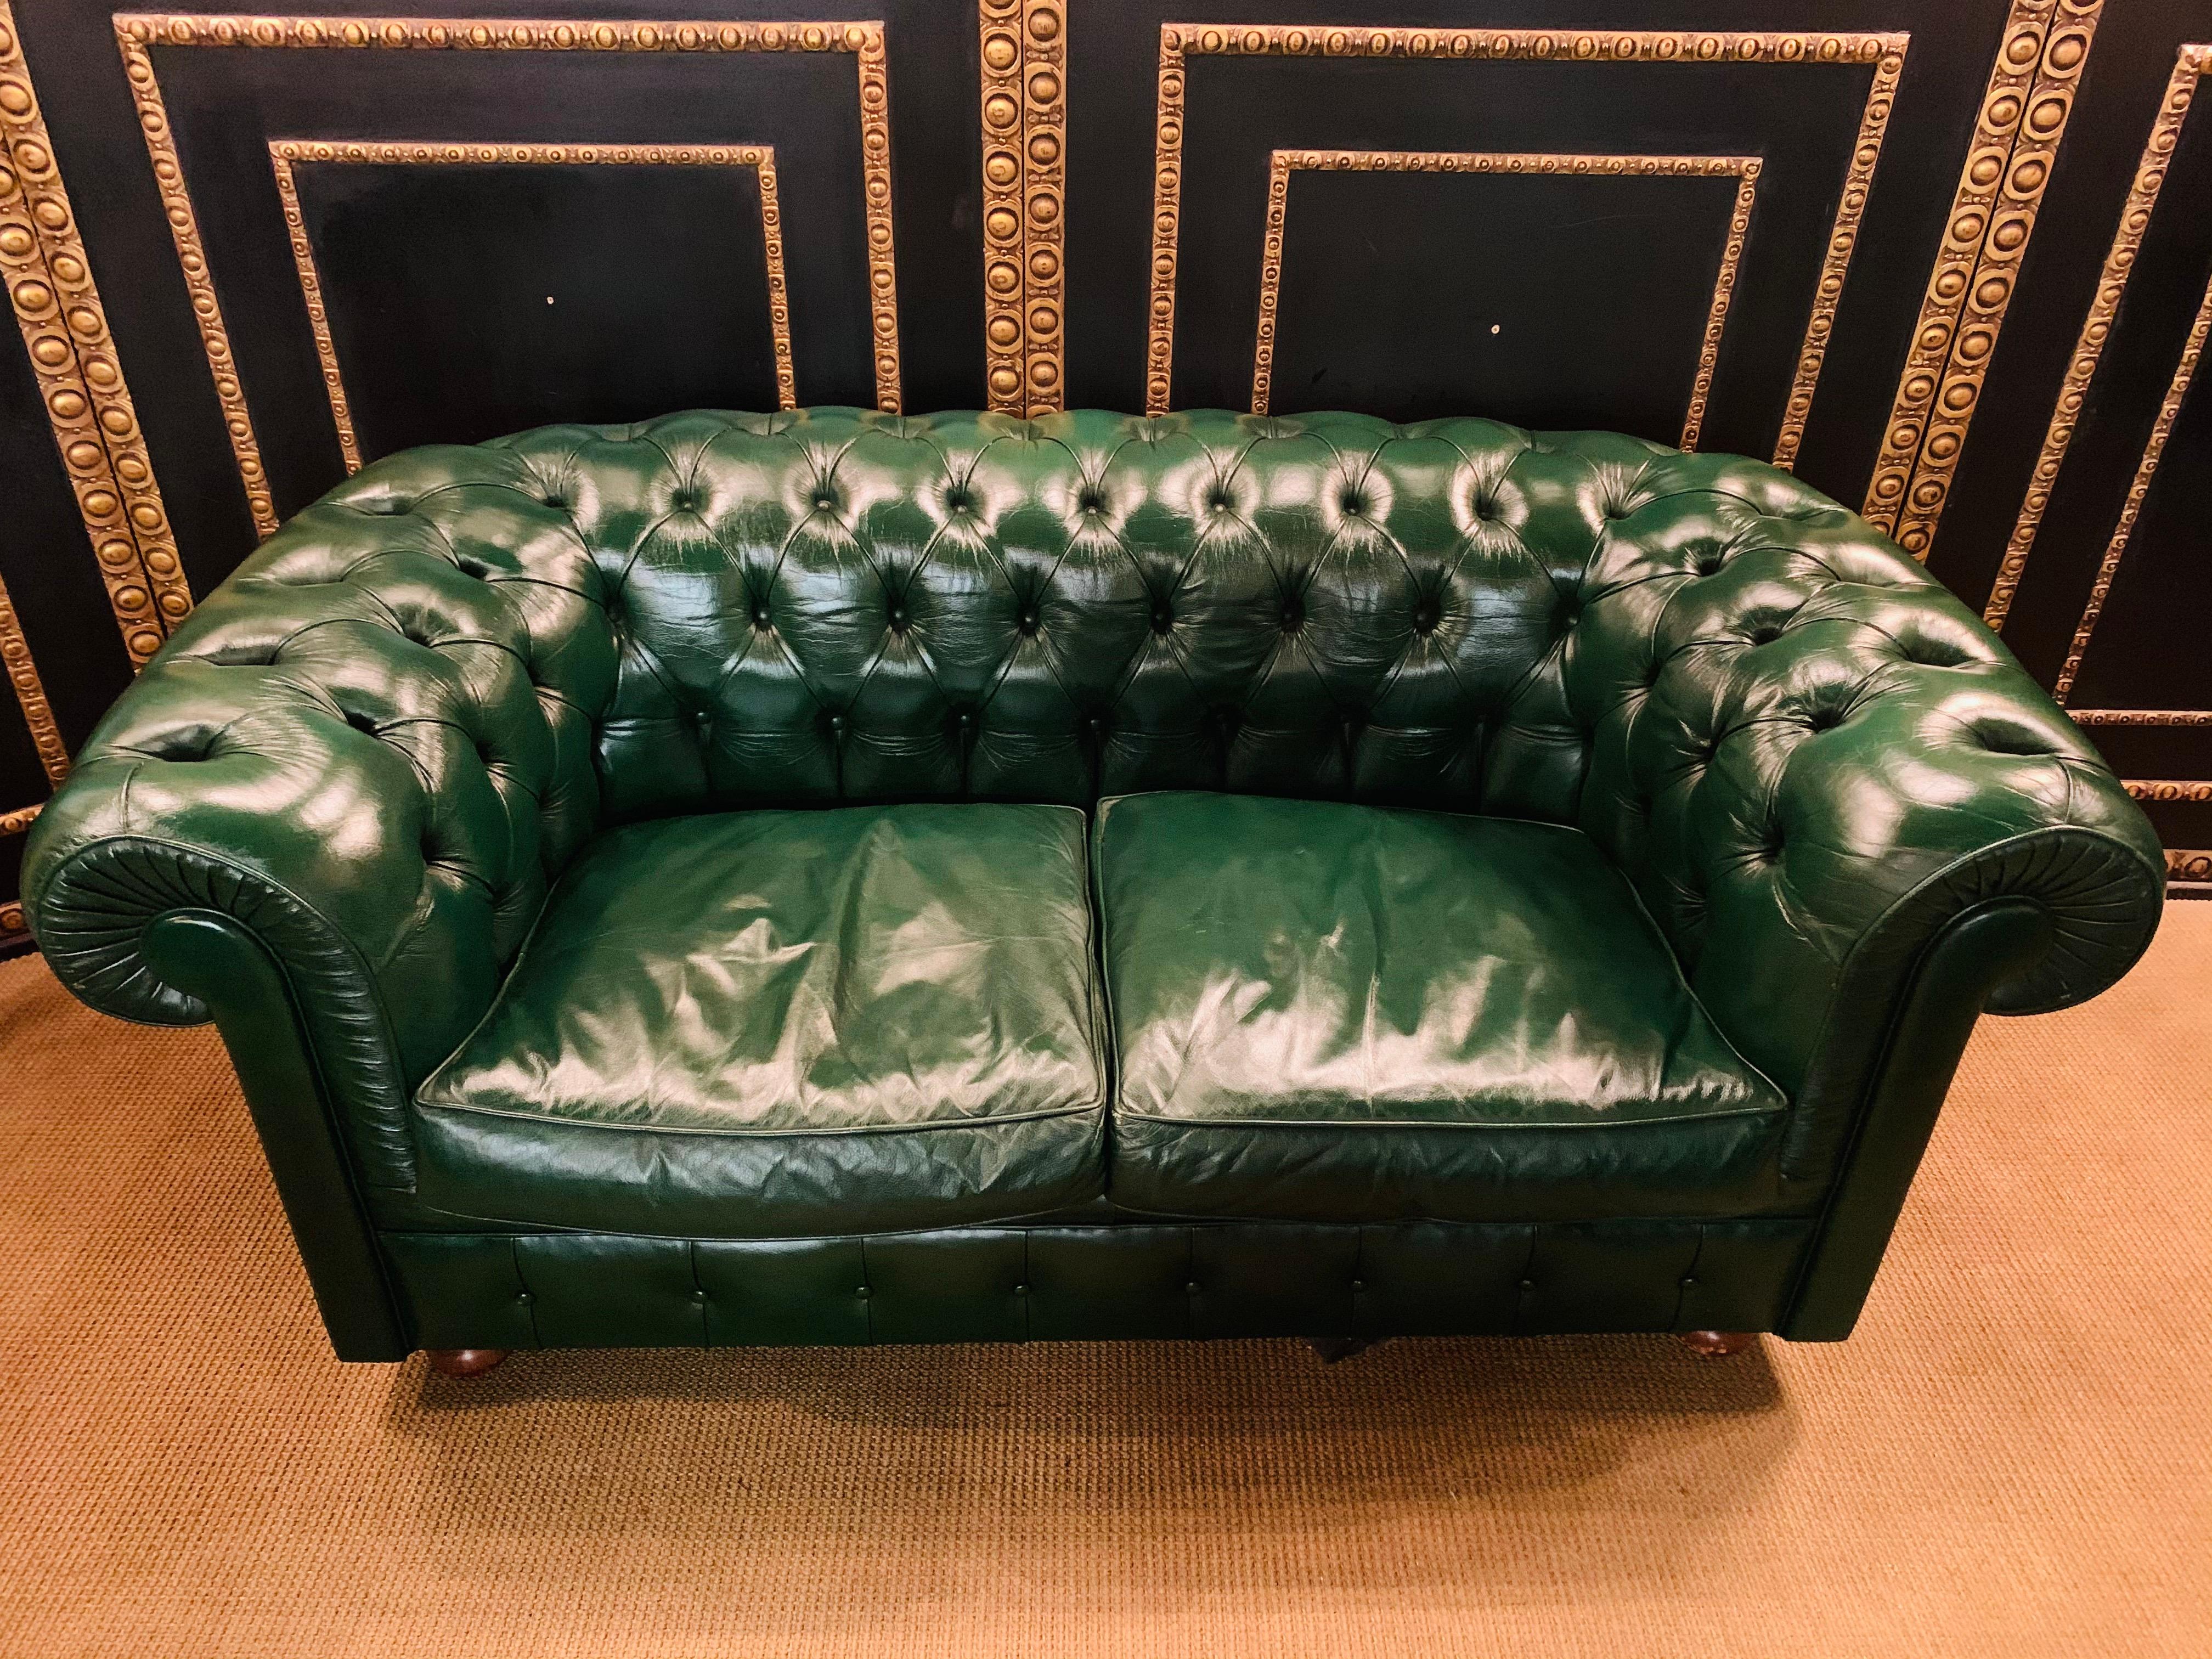 20th Century Green Leather Chesterfield Club Suite Armchair and Sofa from Chateau d'ax